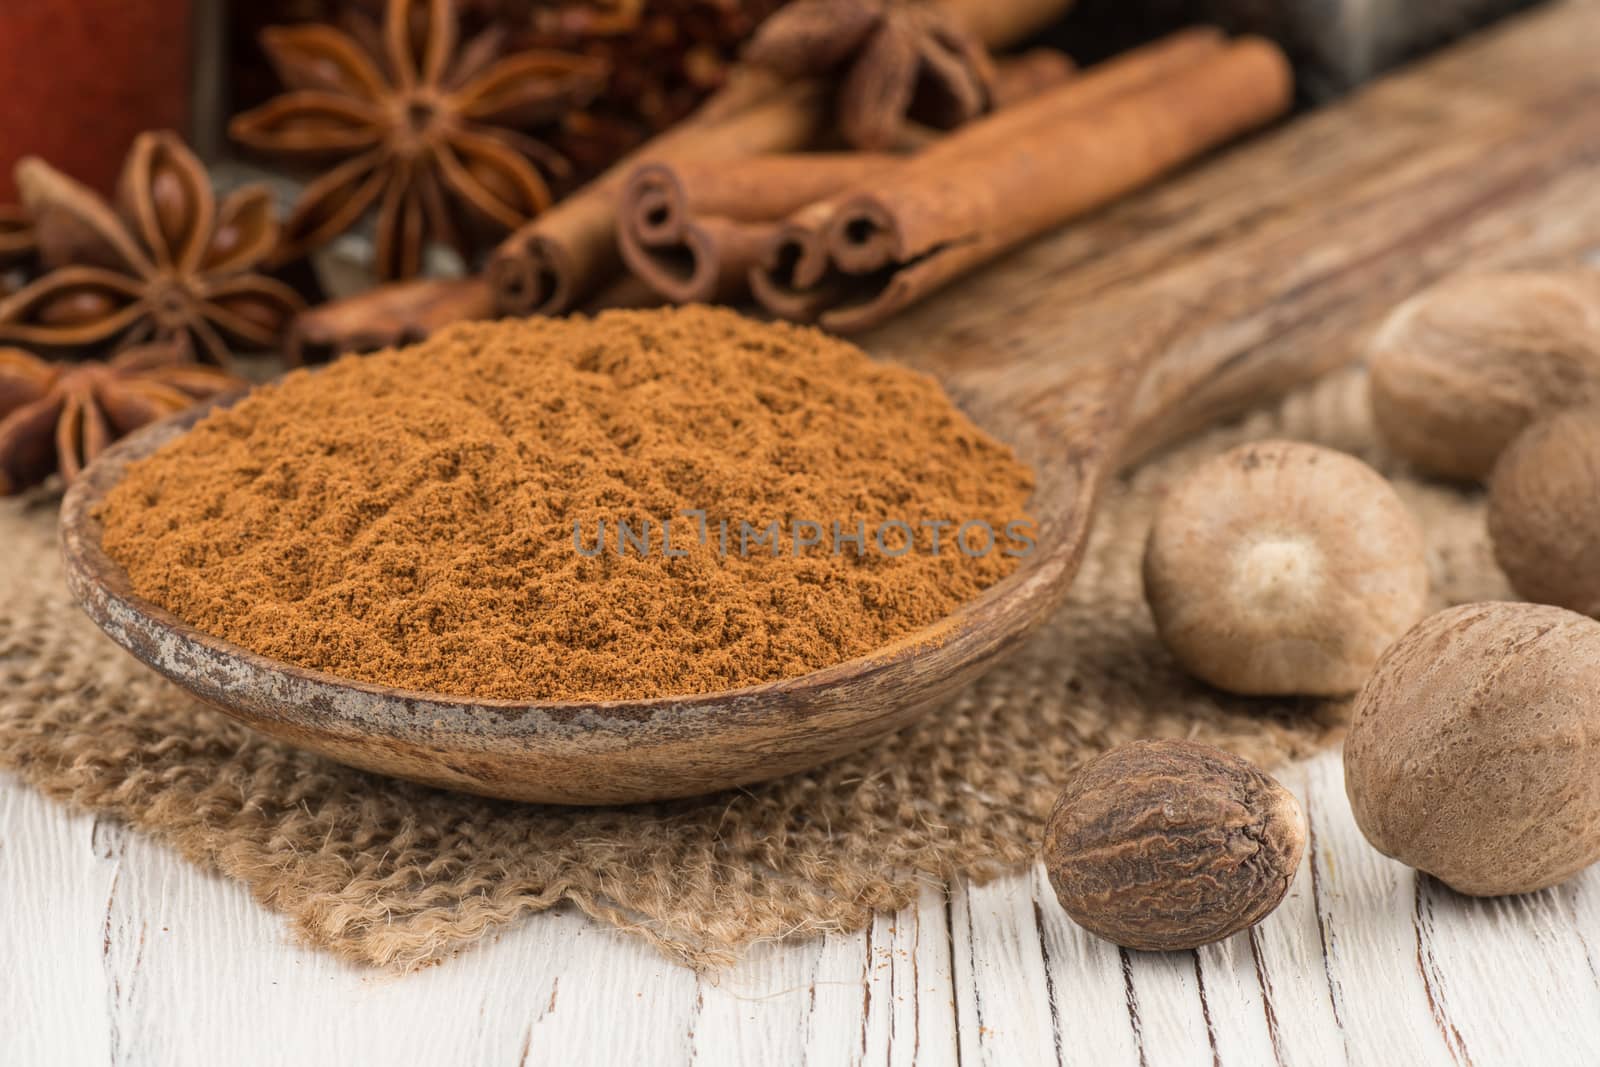 Ground cinnamon in a wooden spoon on the old wooden background. Selective focus.